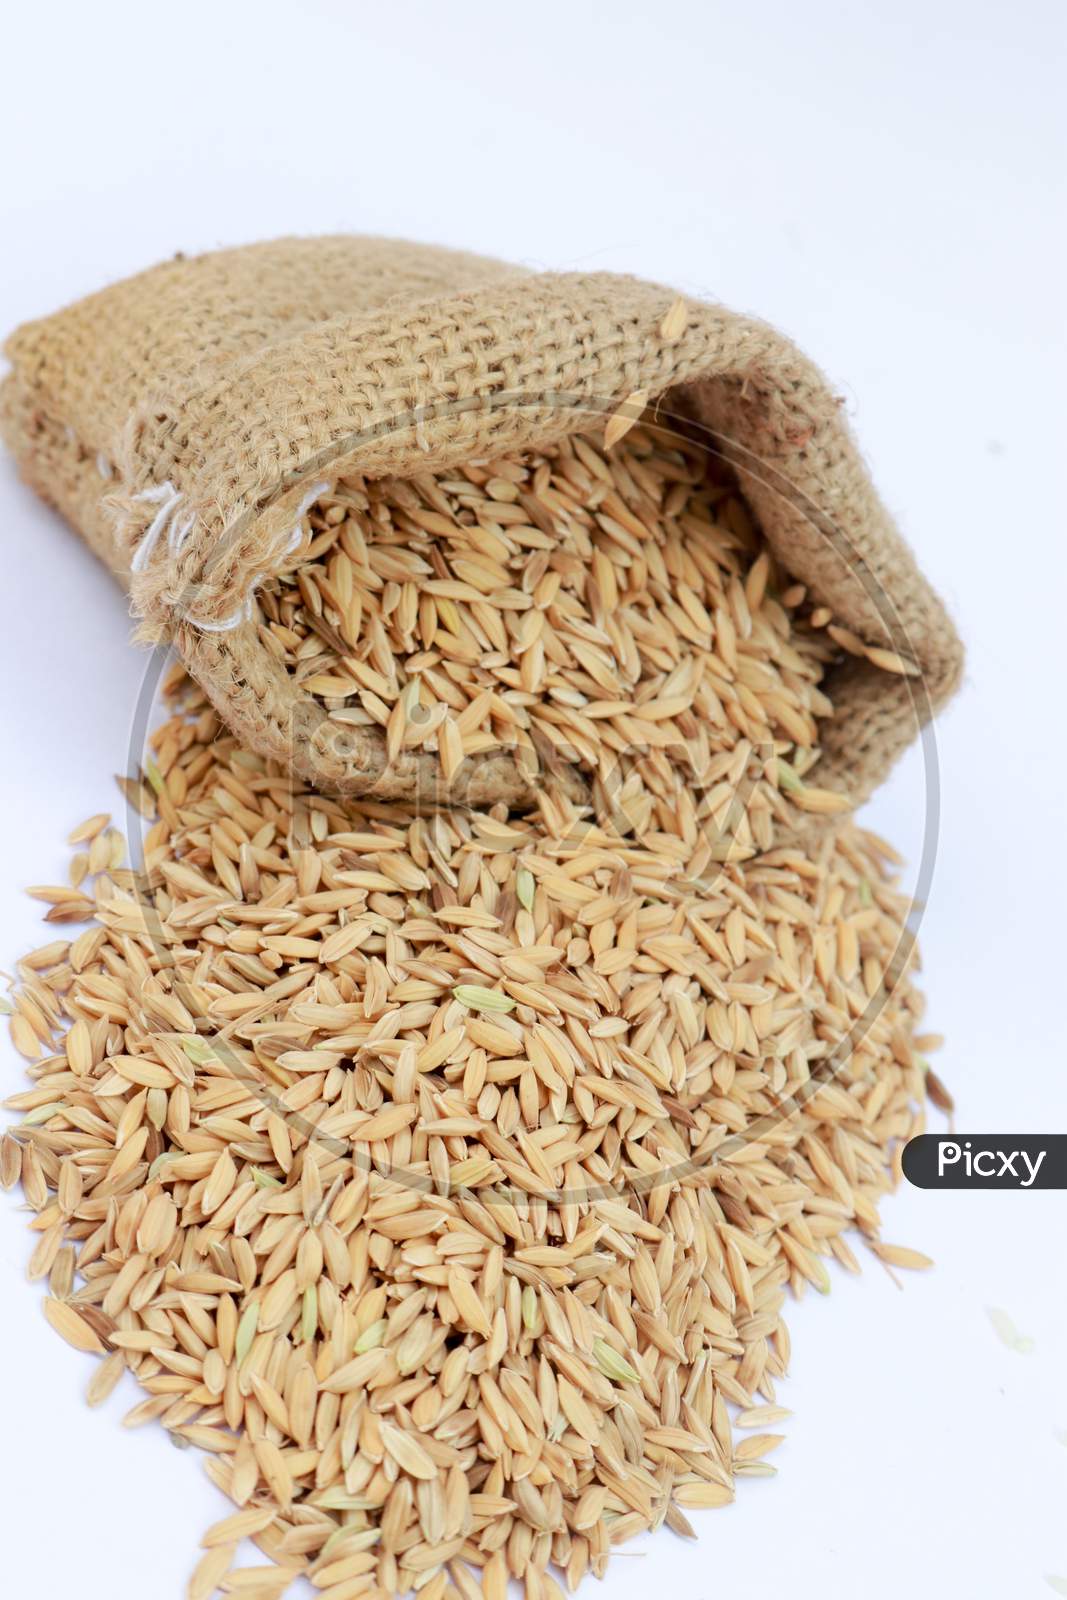 Paddy Rice With A Rice Uncooked In A Bag With Rice Pile Form The Field Of Farmland On The White Background